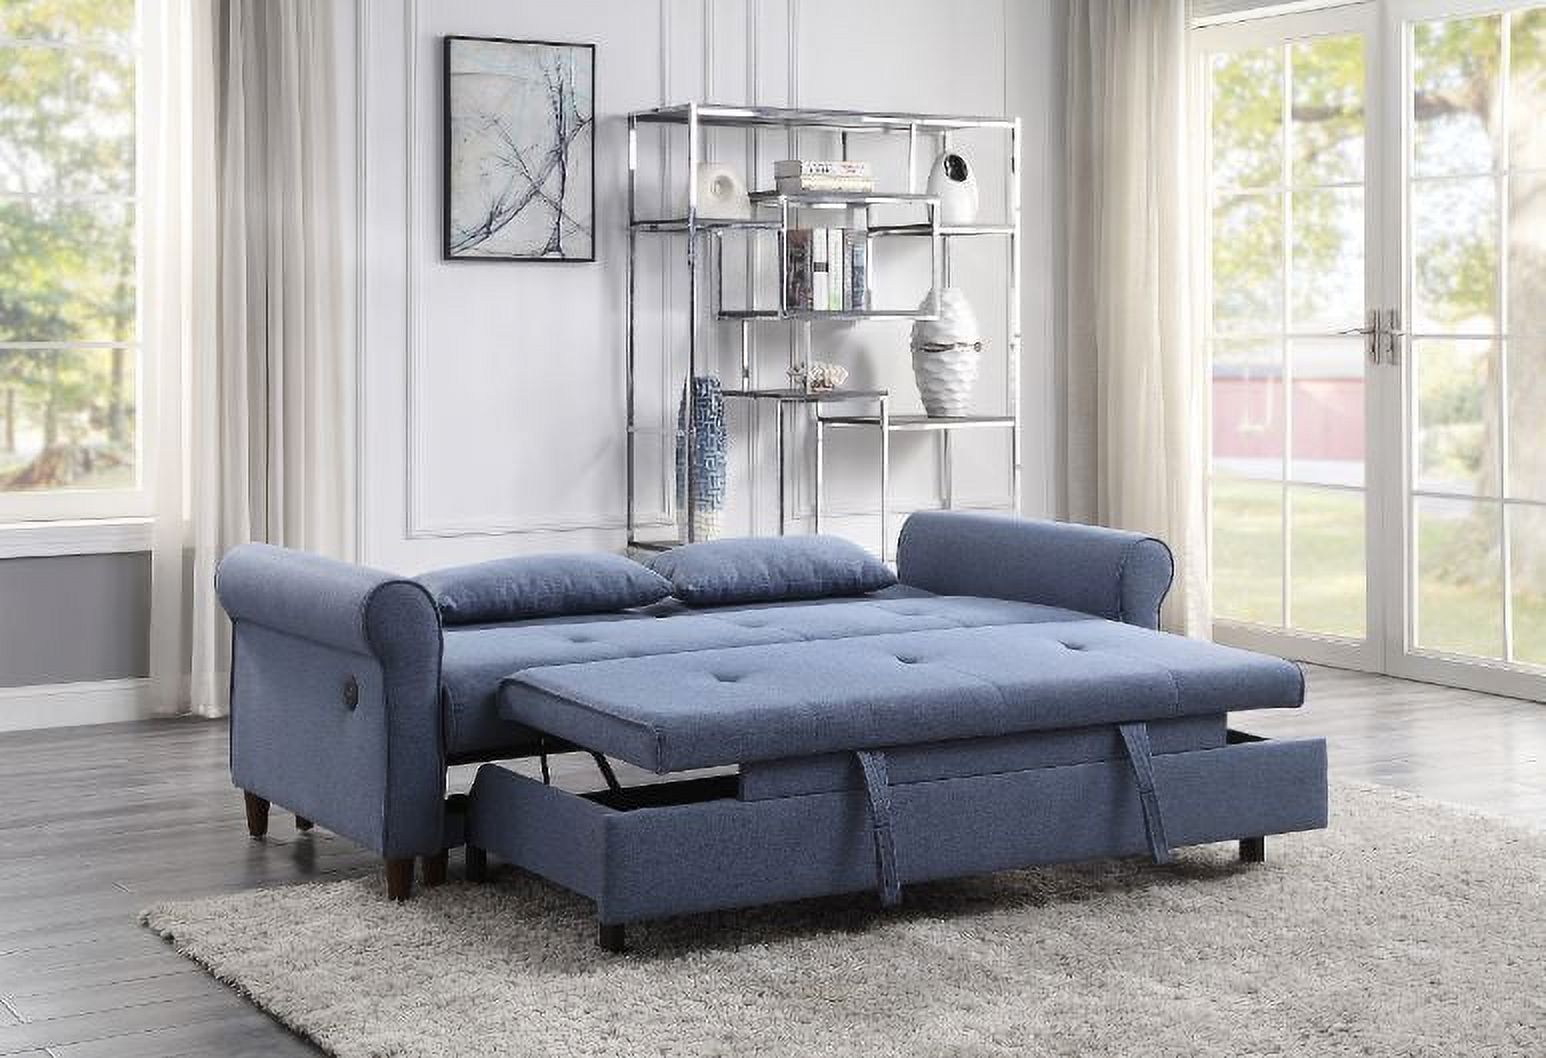 Blue Contemporary Living Room Furniture Pull-out Sleeper Sofa Built in USB Port - image 1 of 3